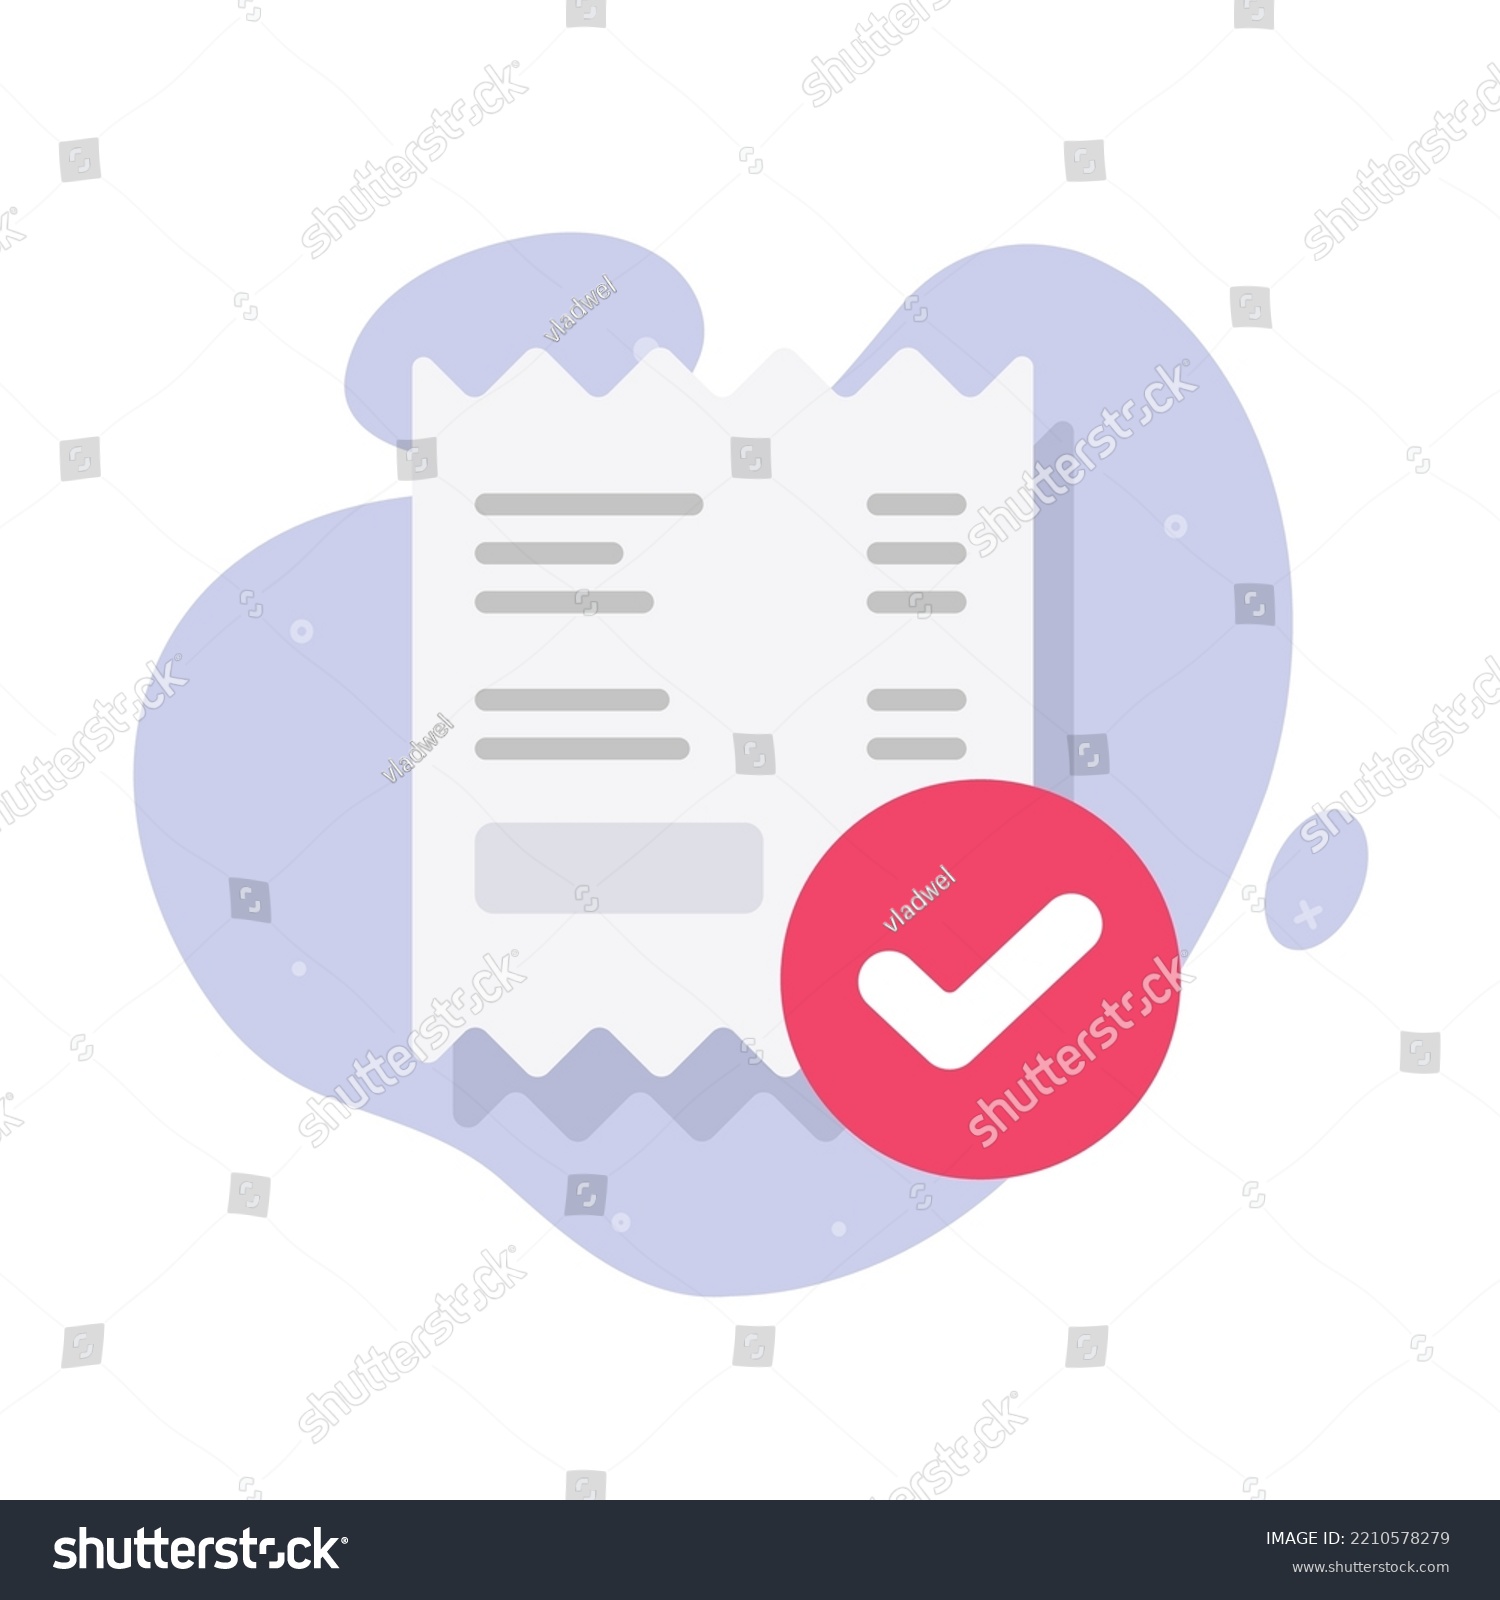 SVG of Payment bill completed icon vector or paid done order receipt invoice graphic illustration flat, confirm or valid verified money transaction symbol editable design, pay check mark review notification svg